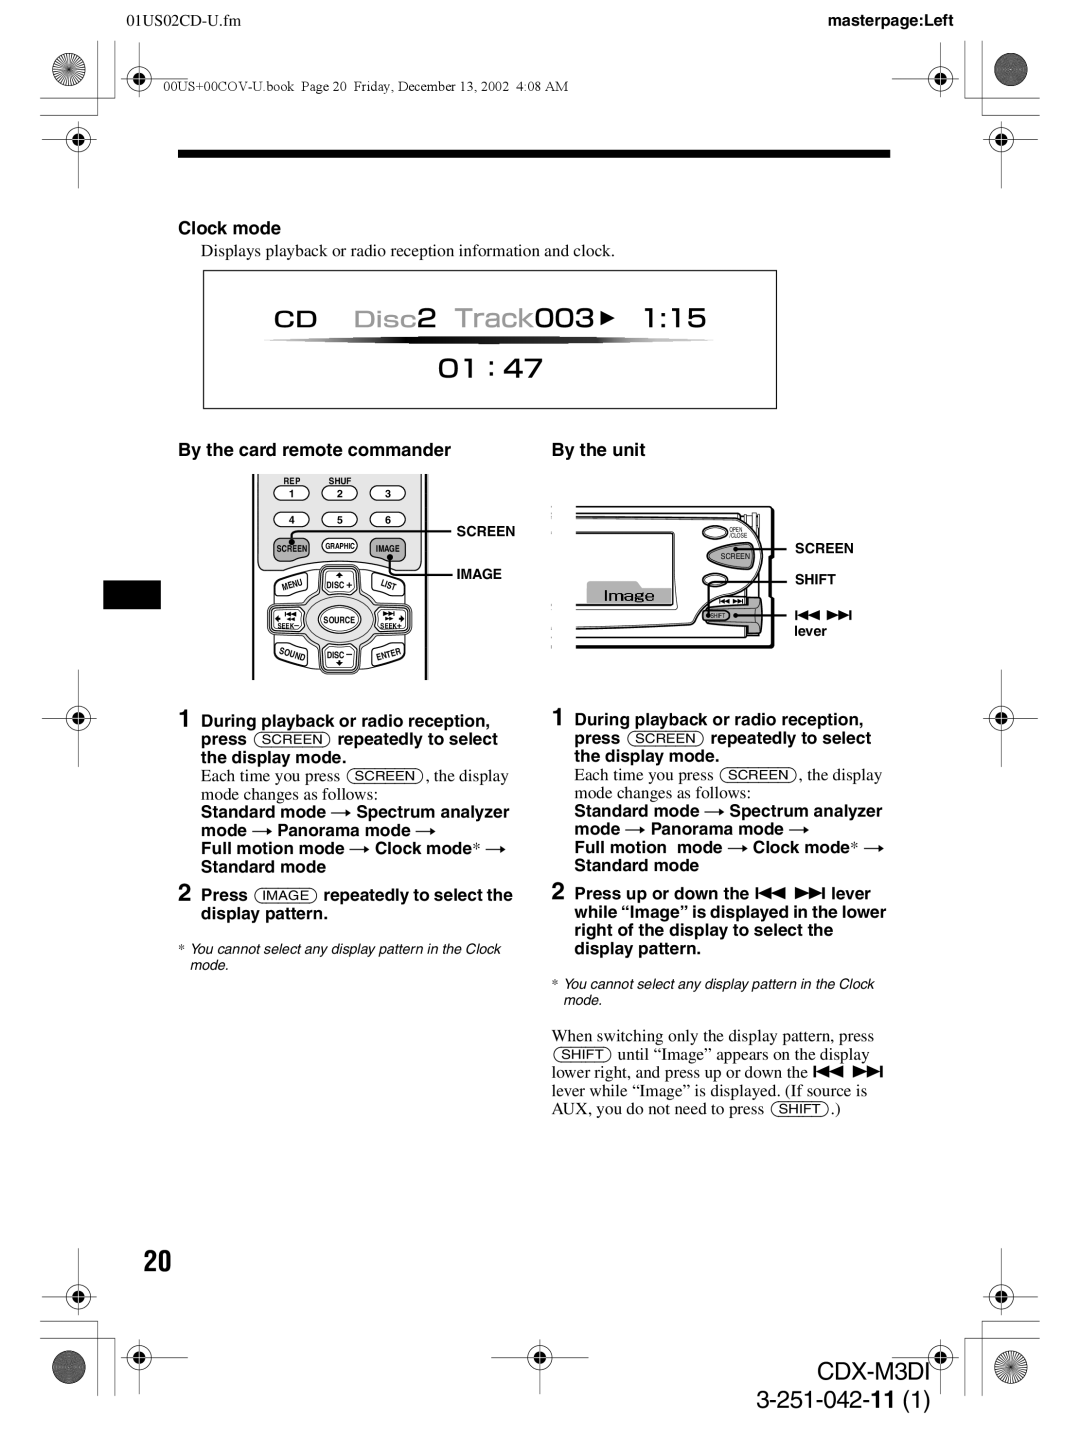 Sony CDX-M3DI operating instructions 3-251-042-11, Clock mode, By the card remote commander, By the unit, 01US02CD-U.fm 